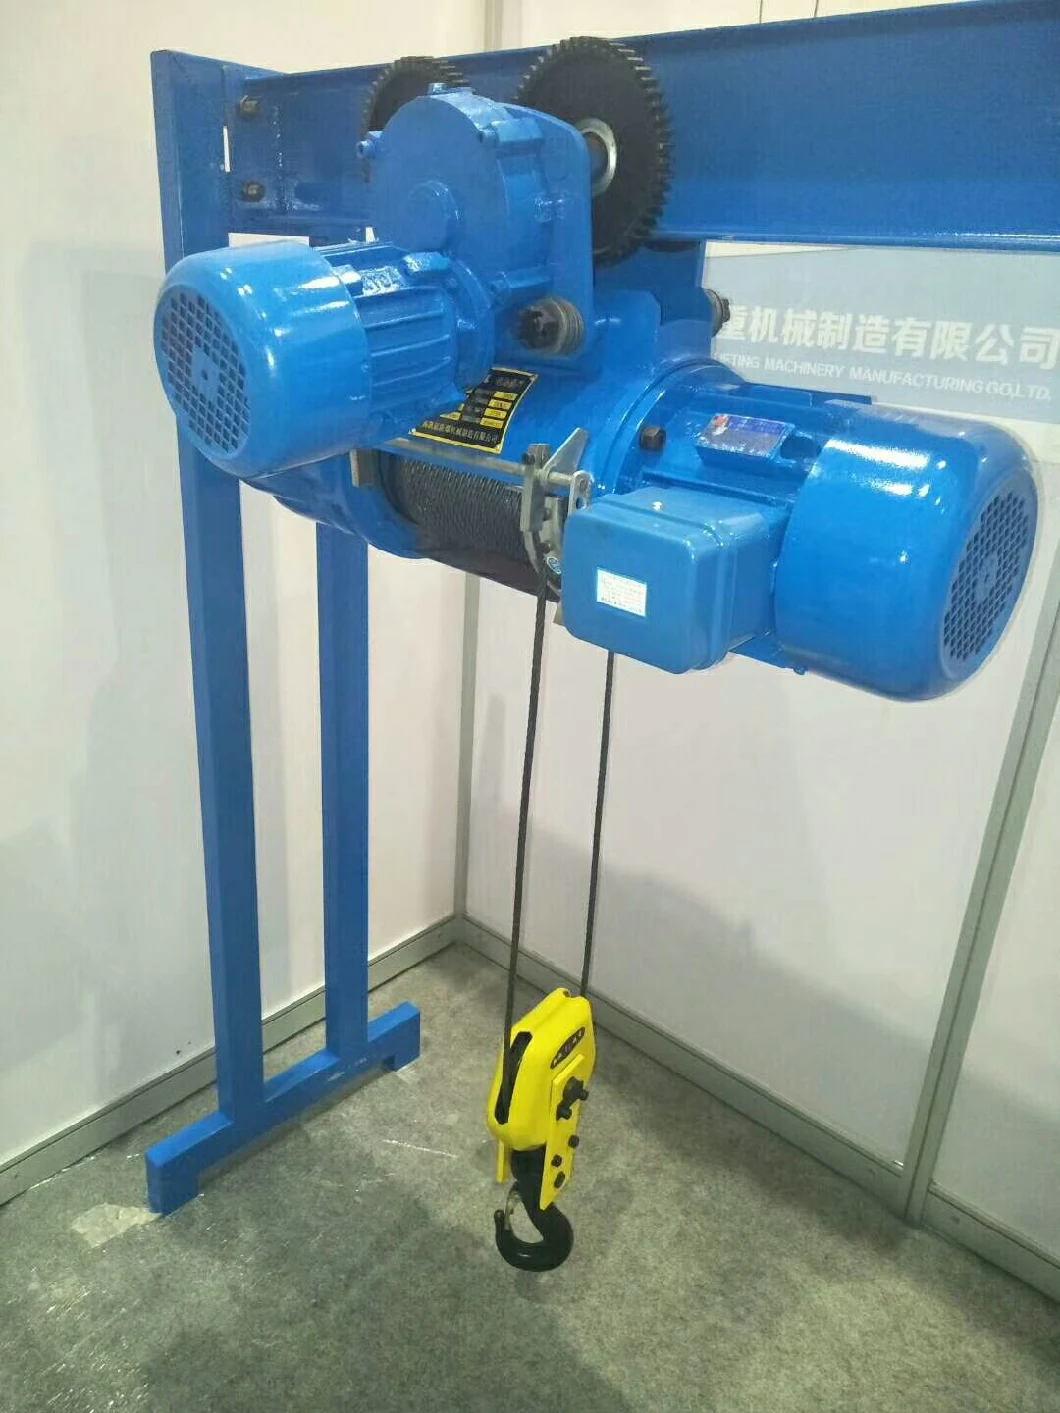 Construction Crane Cable Electric Winch Pendant Control CD MD